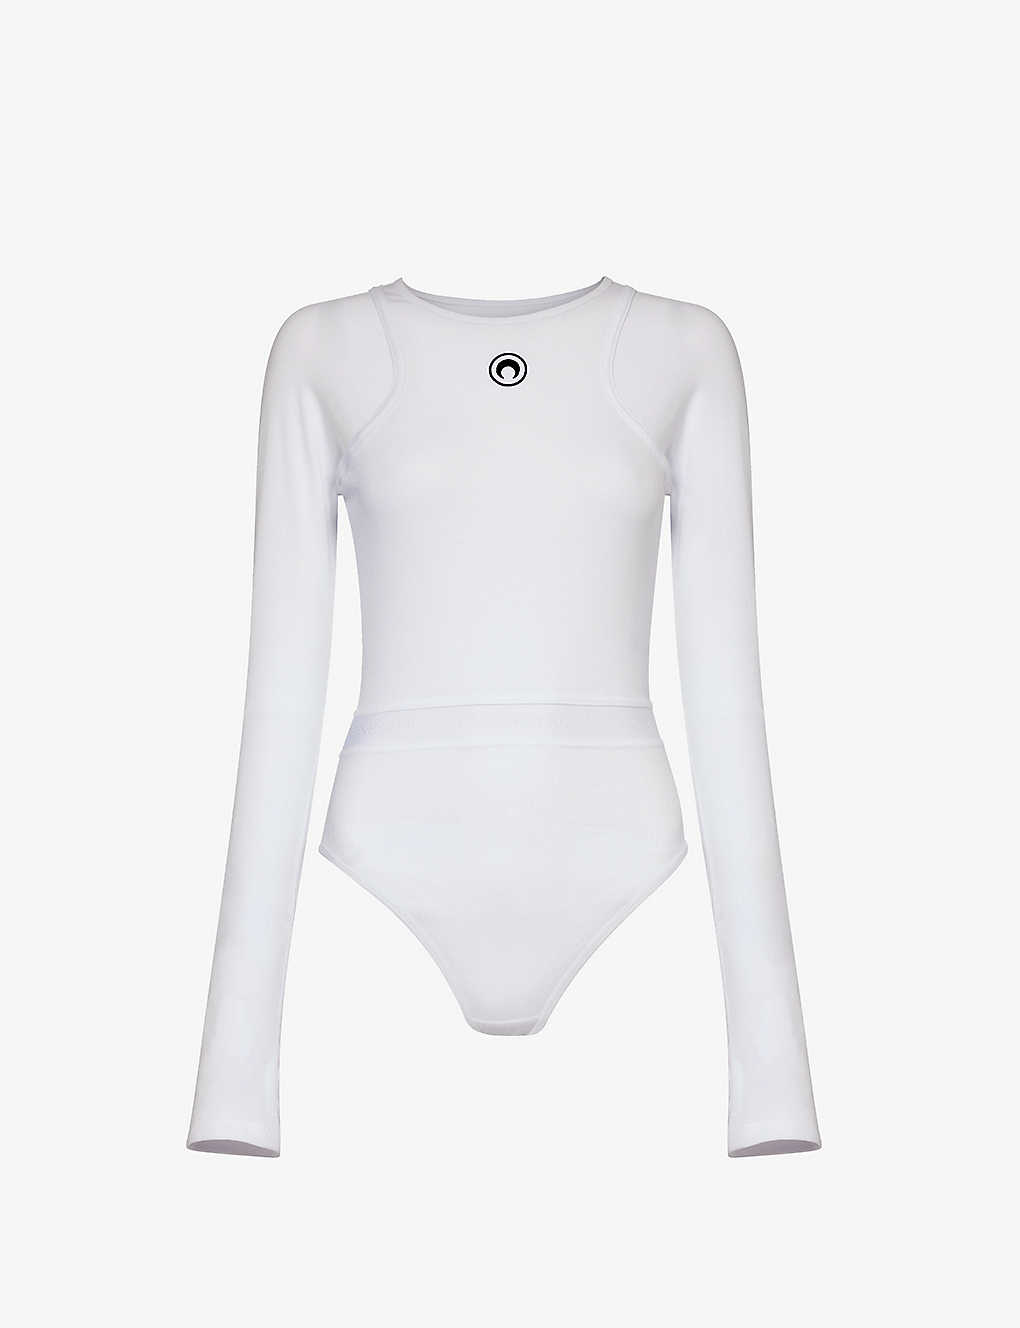 Marine Serre Crescent Moon-embroidered Cotton Bodysuit In Wh10